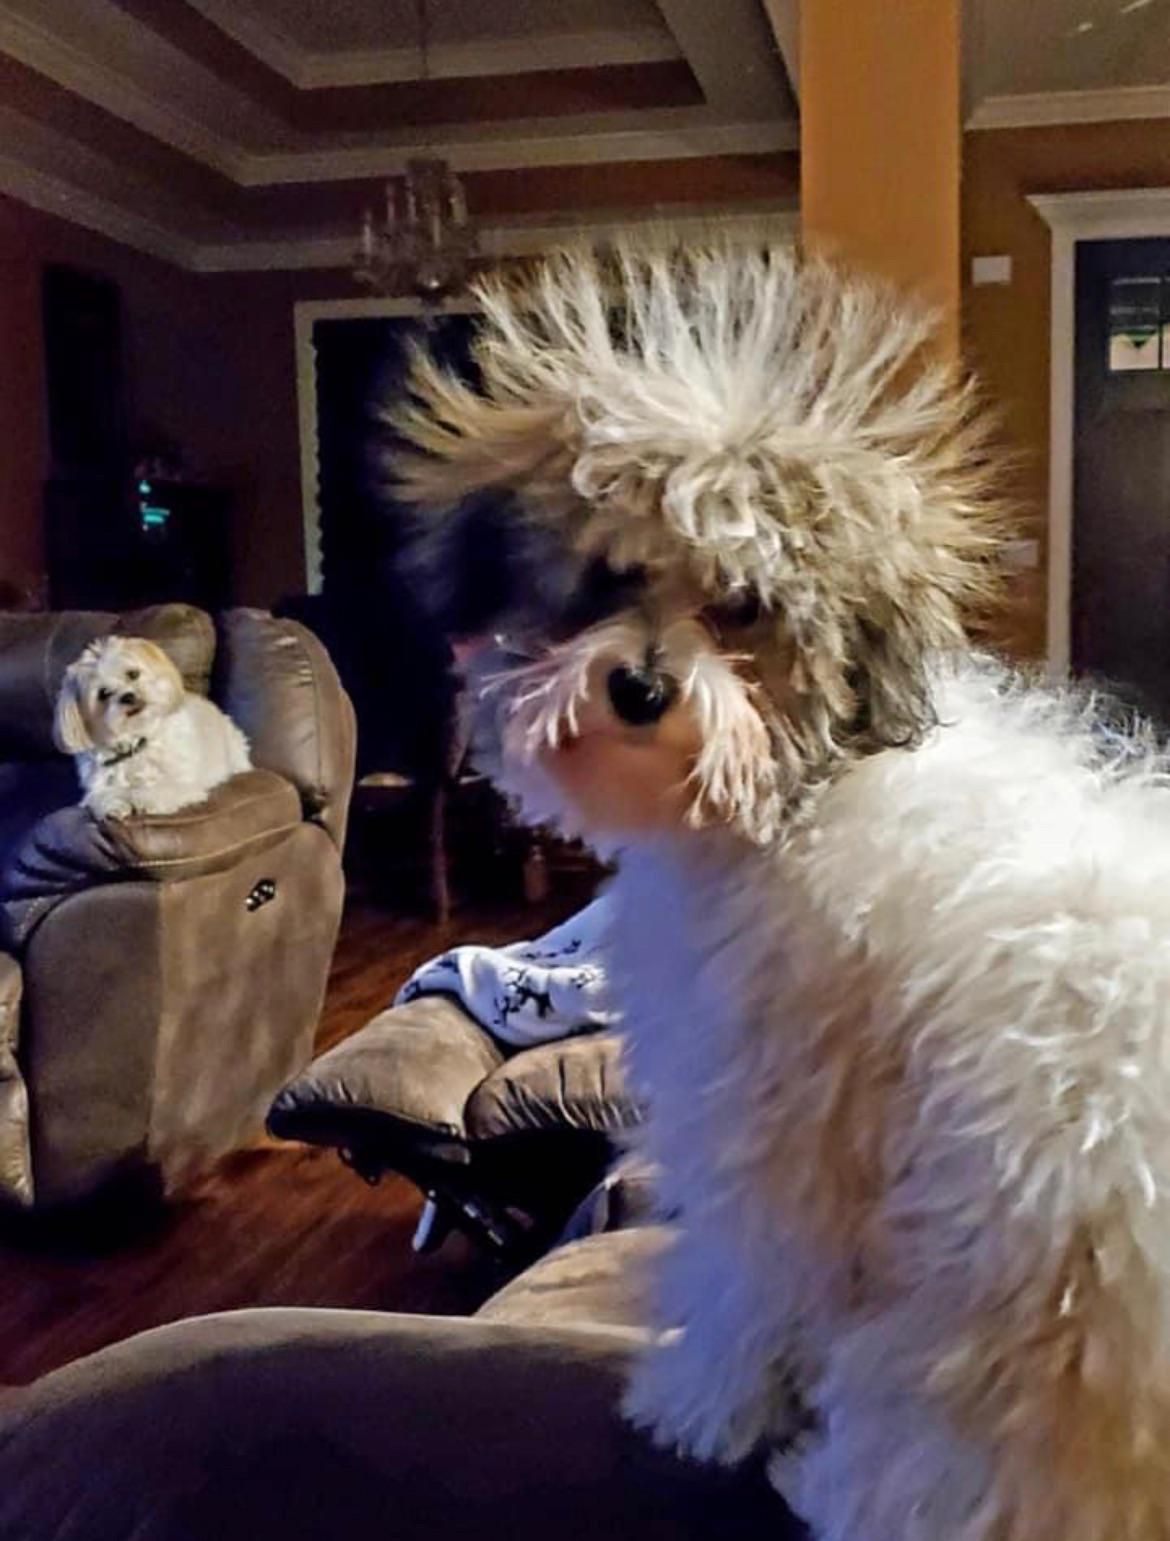 Dog rolled in a staticky blanket. Look at his friend’s reaction.